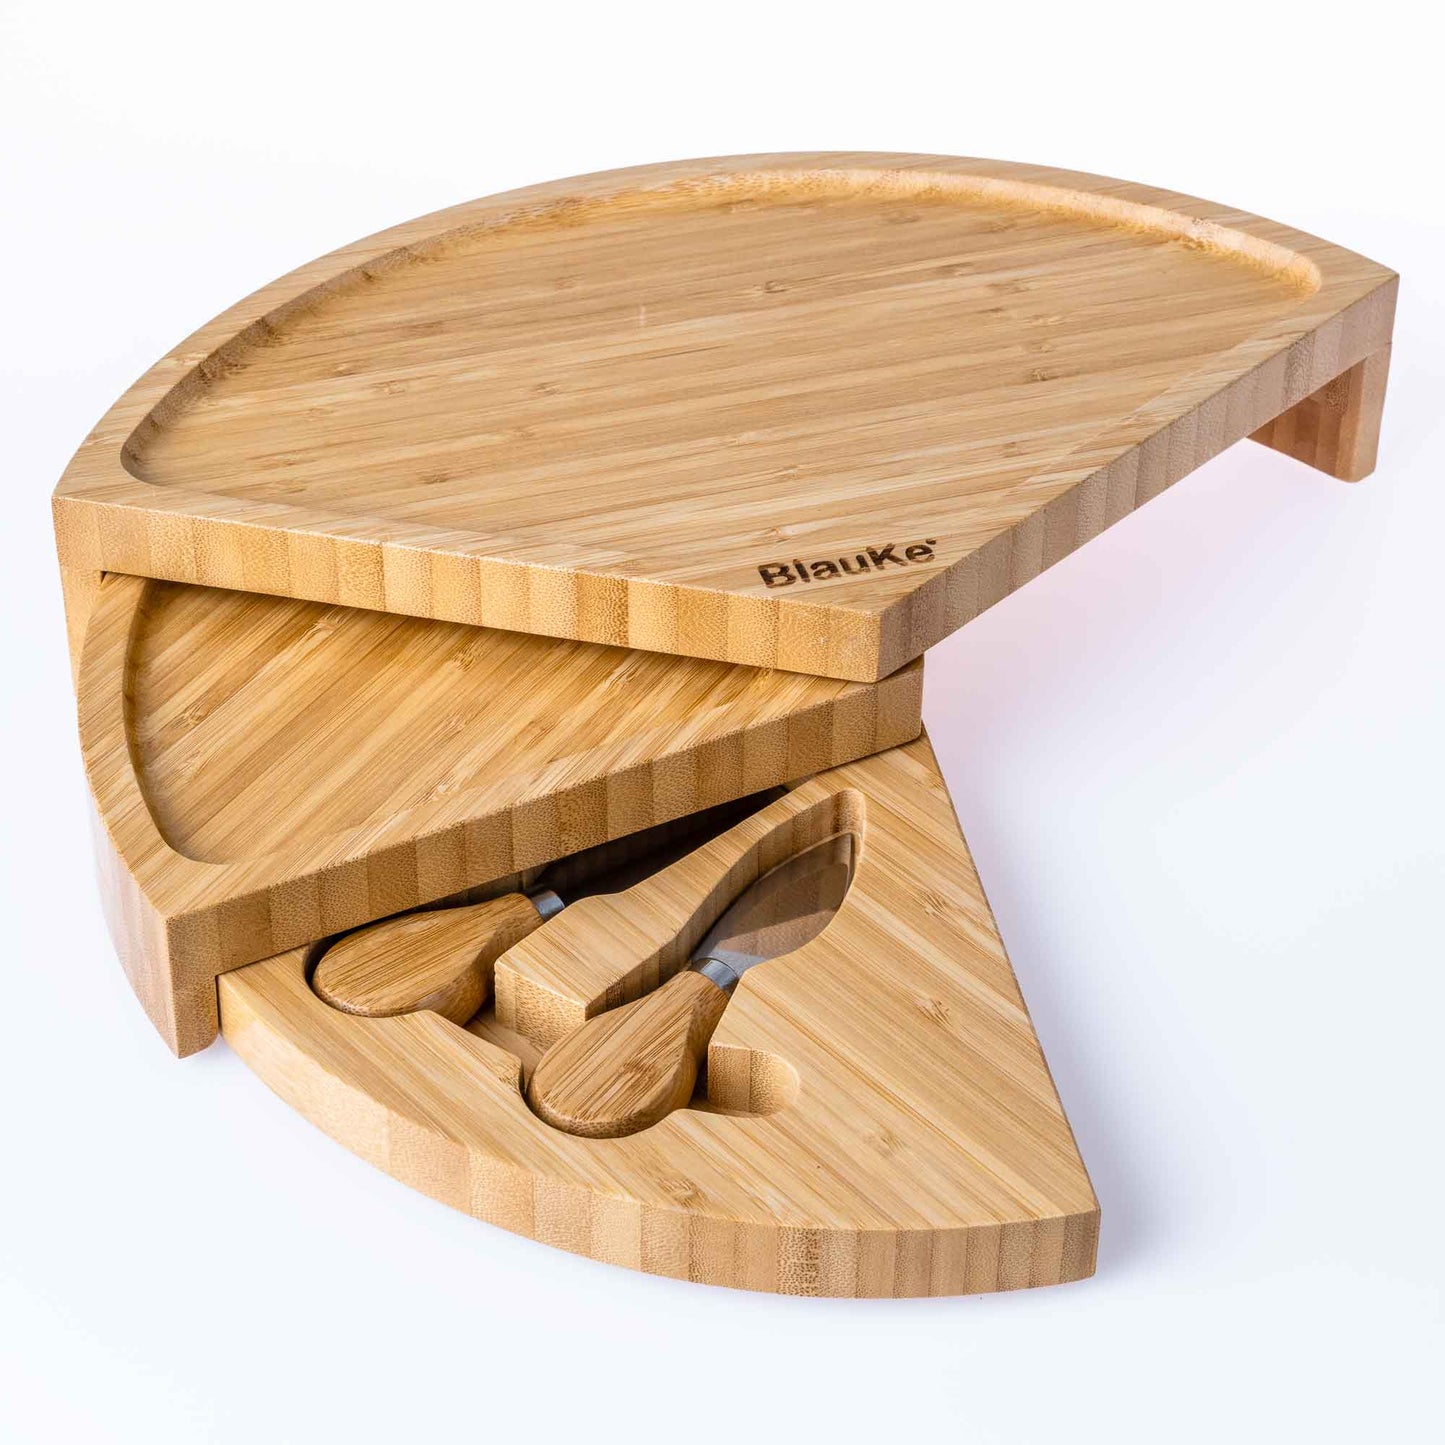 Bamboo Cheese Board and Knife Set - 14 Inch Swiveling Charcuterie Board with Slide-Out Drawer - Cheese Serving Platter, Round Serving Tray-11